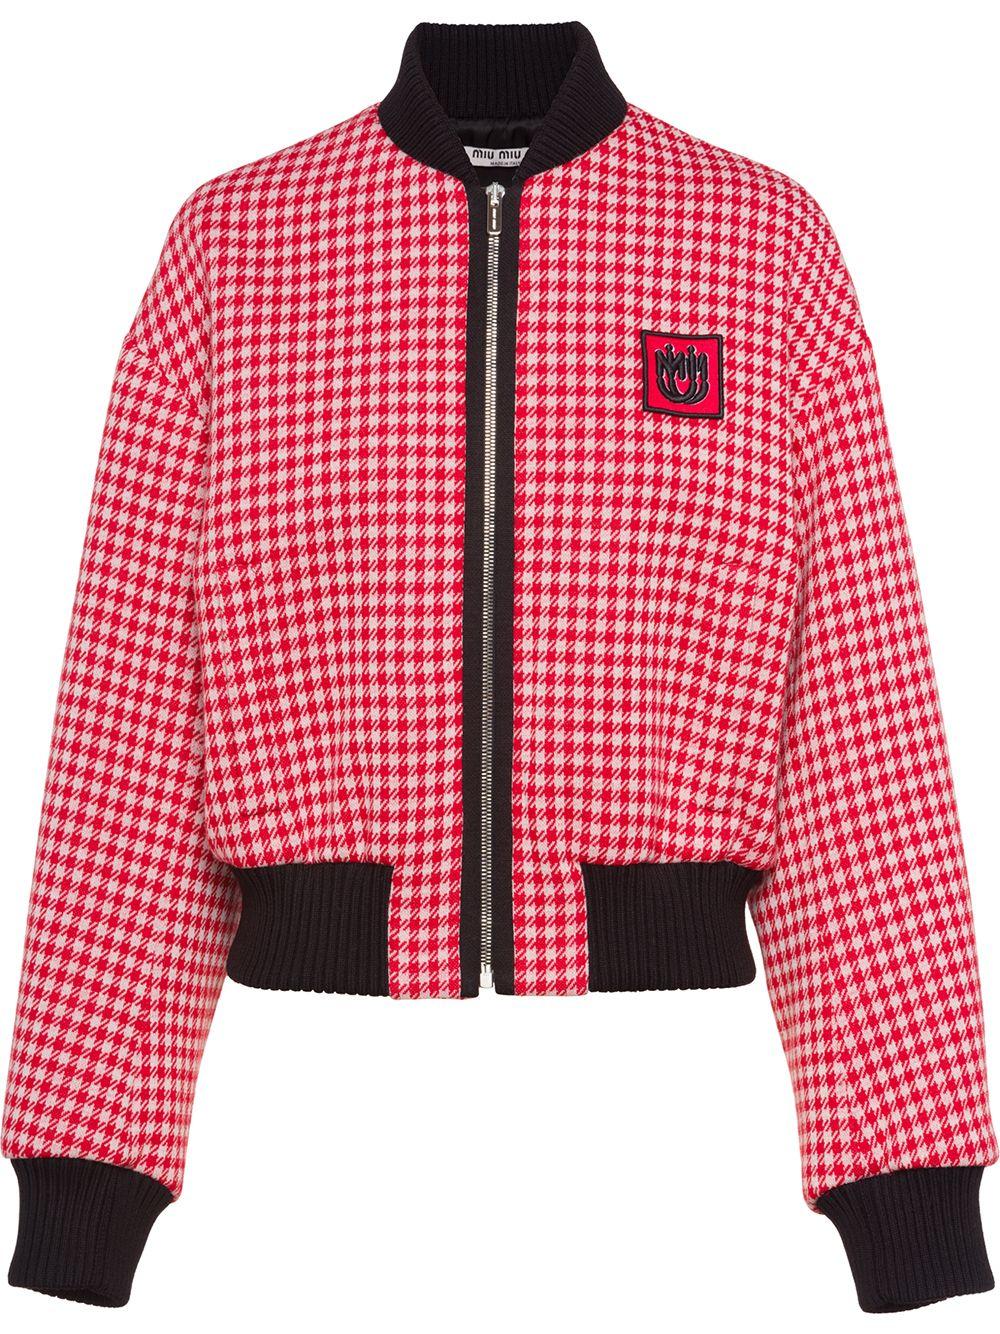 Miu Miu Wool Gingham Check Jersey Jacket in Red - Lyst